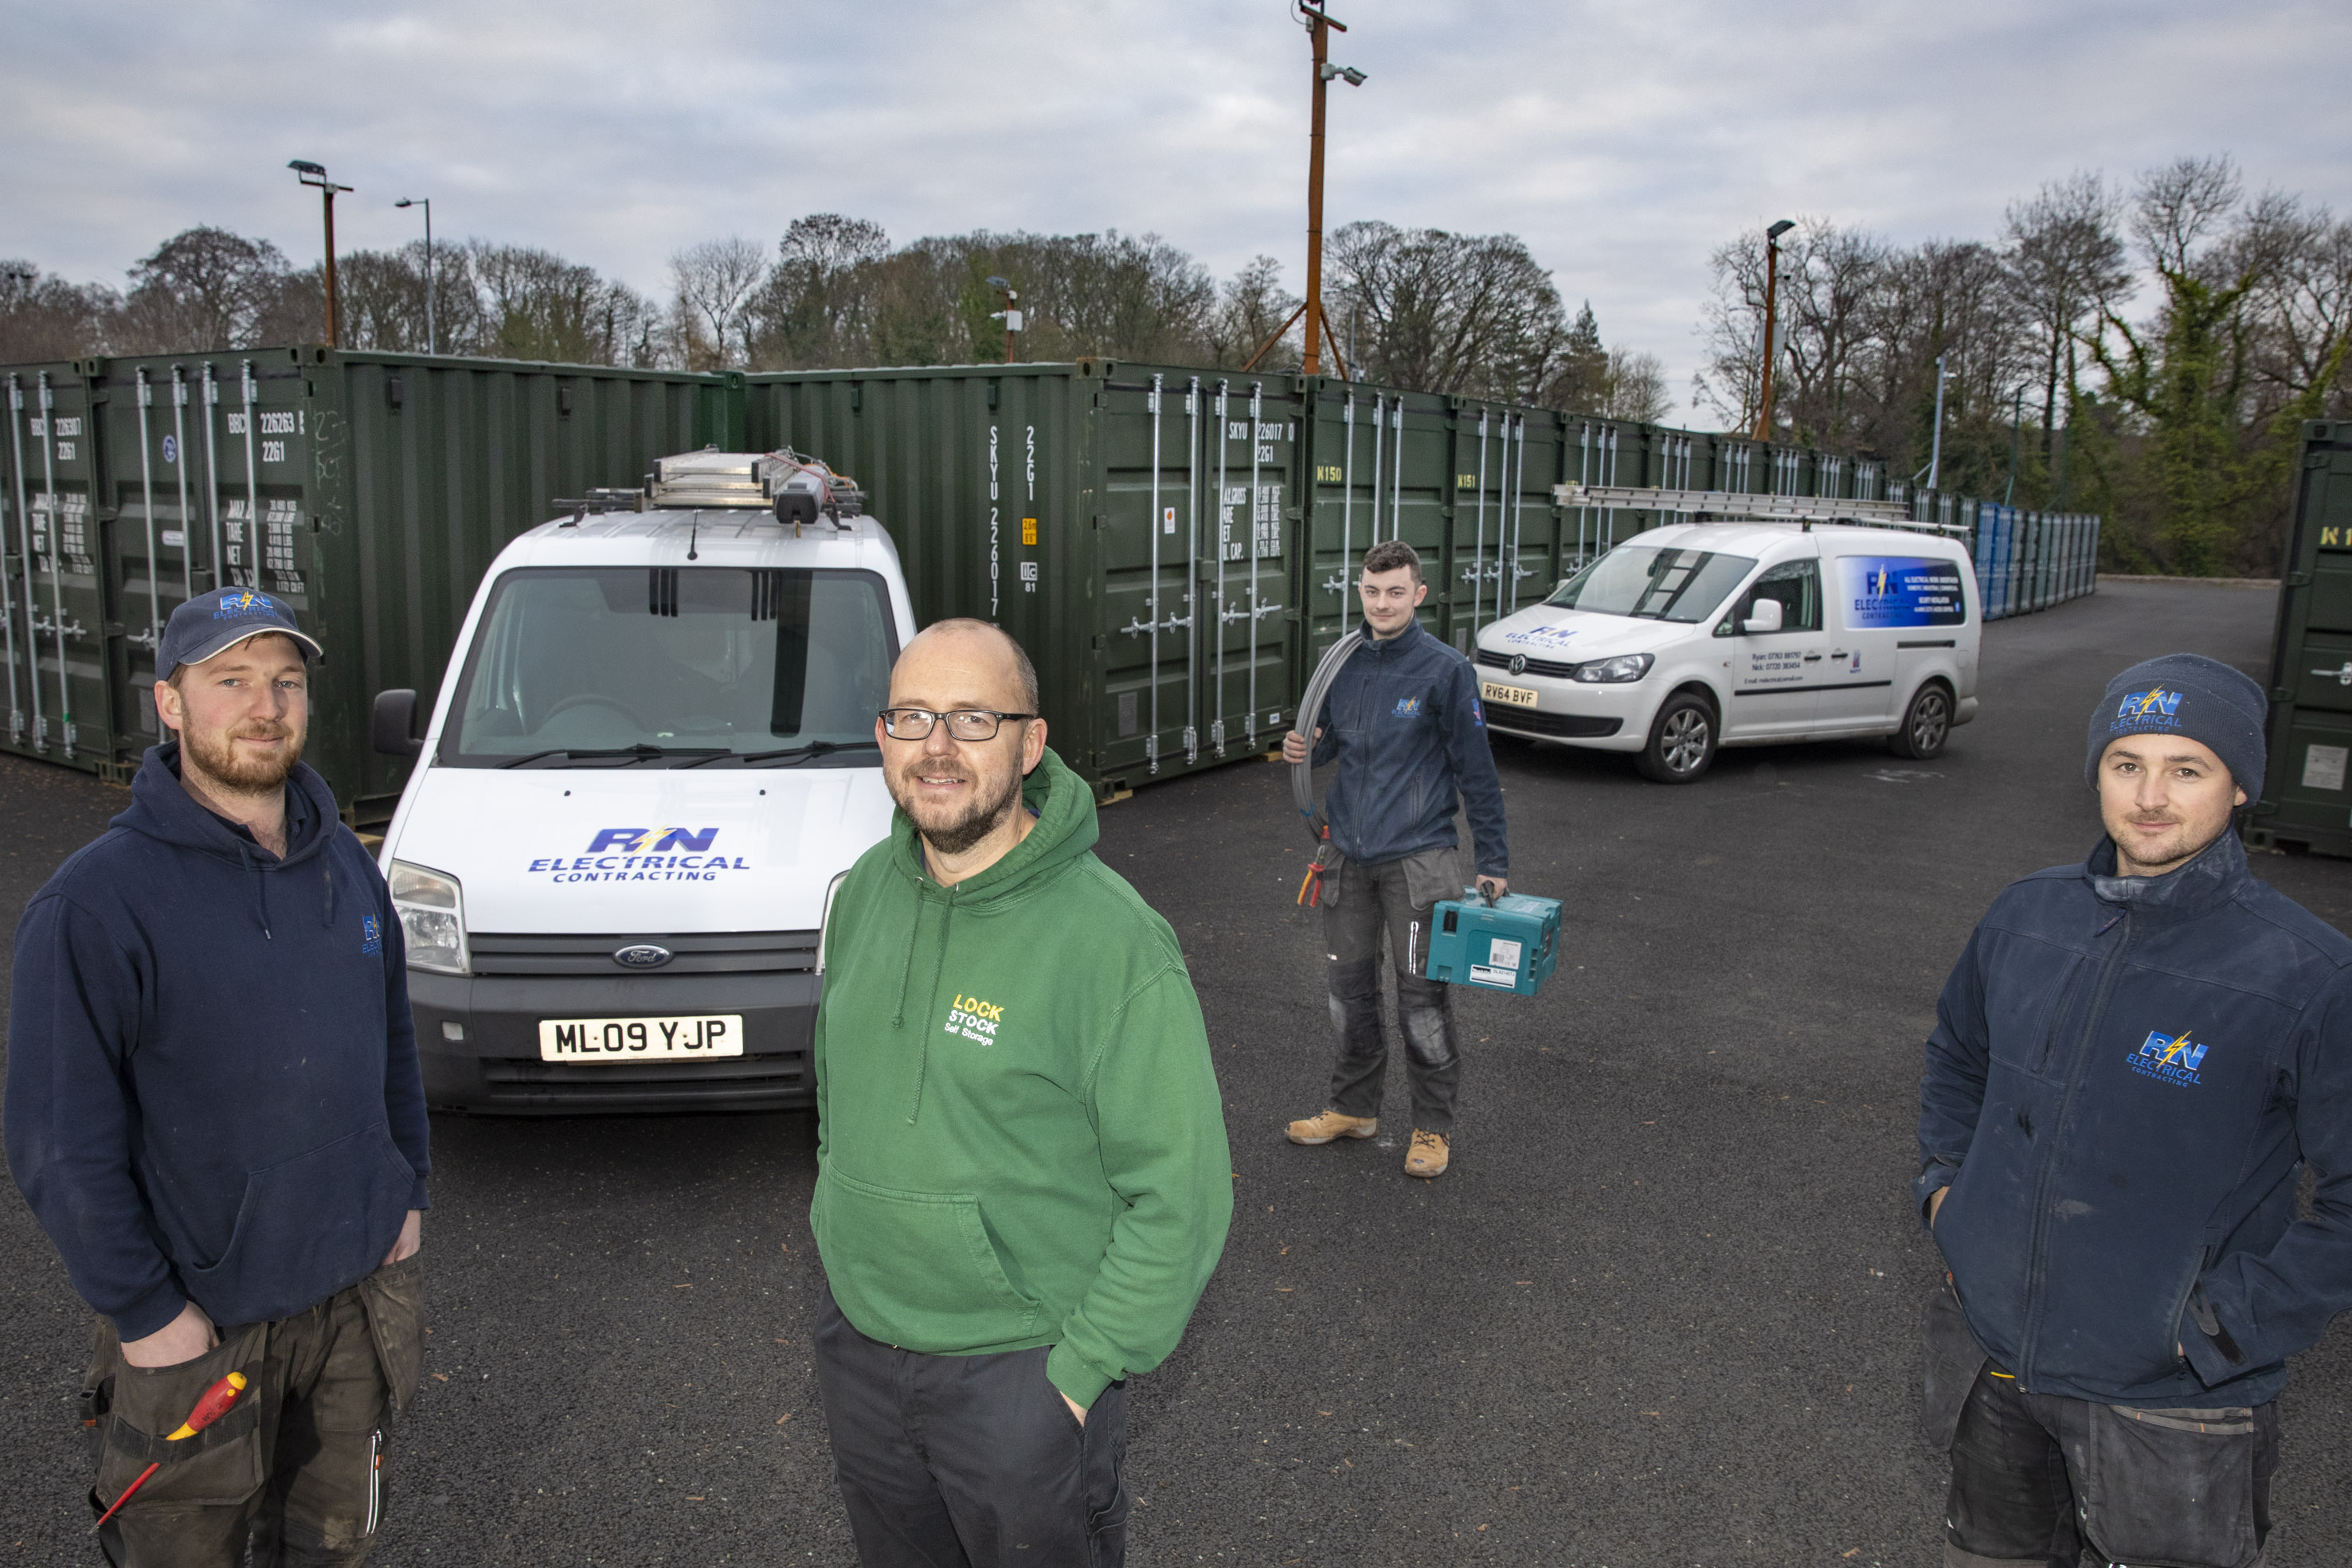 Surge in demand for security is just the job for electricians who met at college